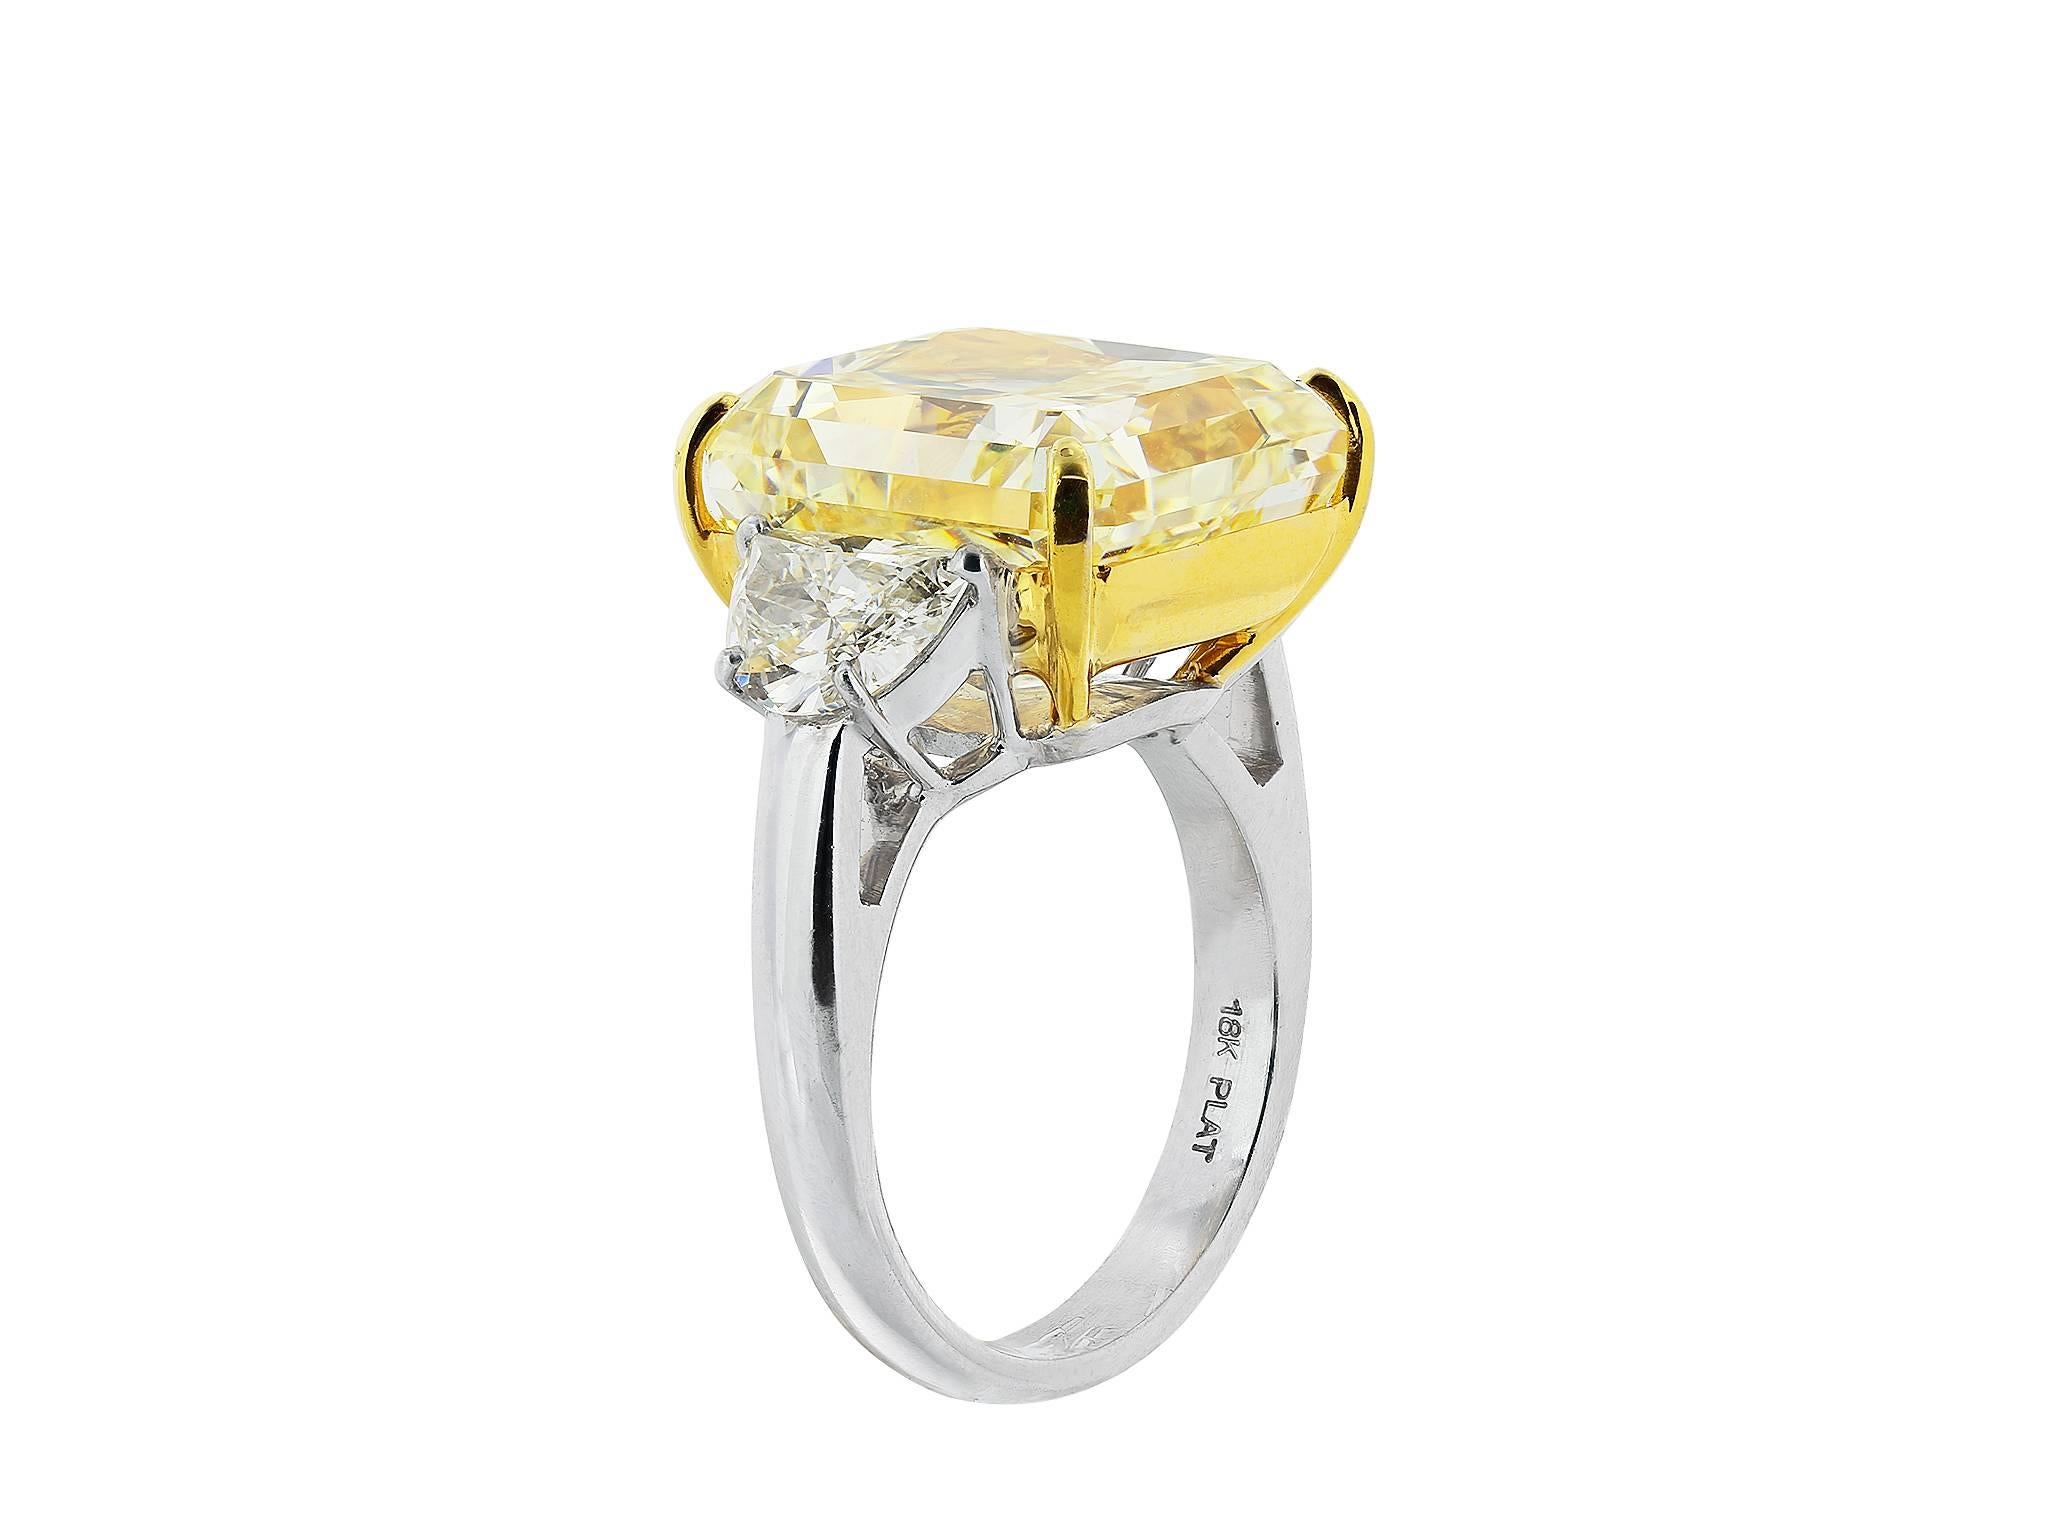 Shreve, Crump & Low custom made, platinum and 18 karat yellow gold, three stone style engagement ring consisting of 1 radiant cut canary diamond, weighing 20.24 carats, measuring 15.81 x 14.40 x 9.62 mm, having a color and clarity of Fancy Intense